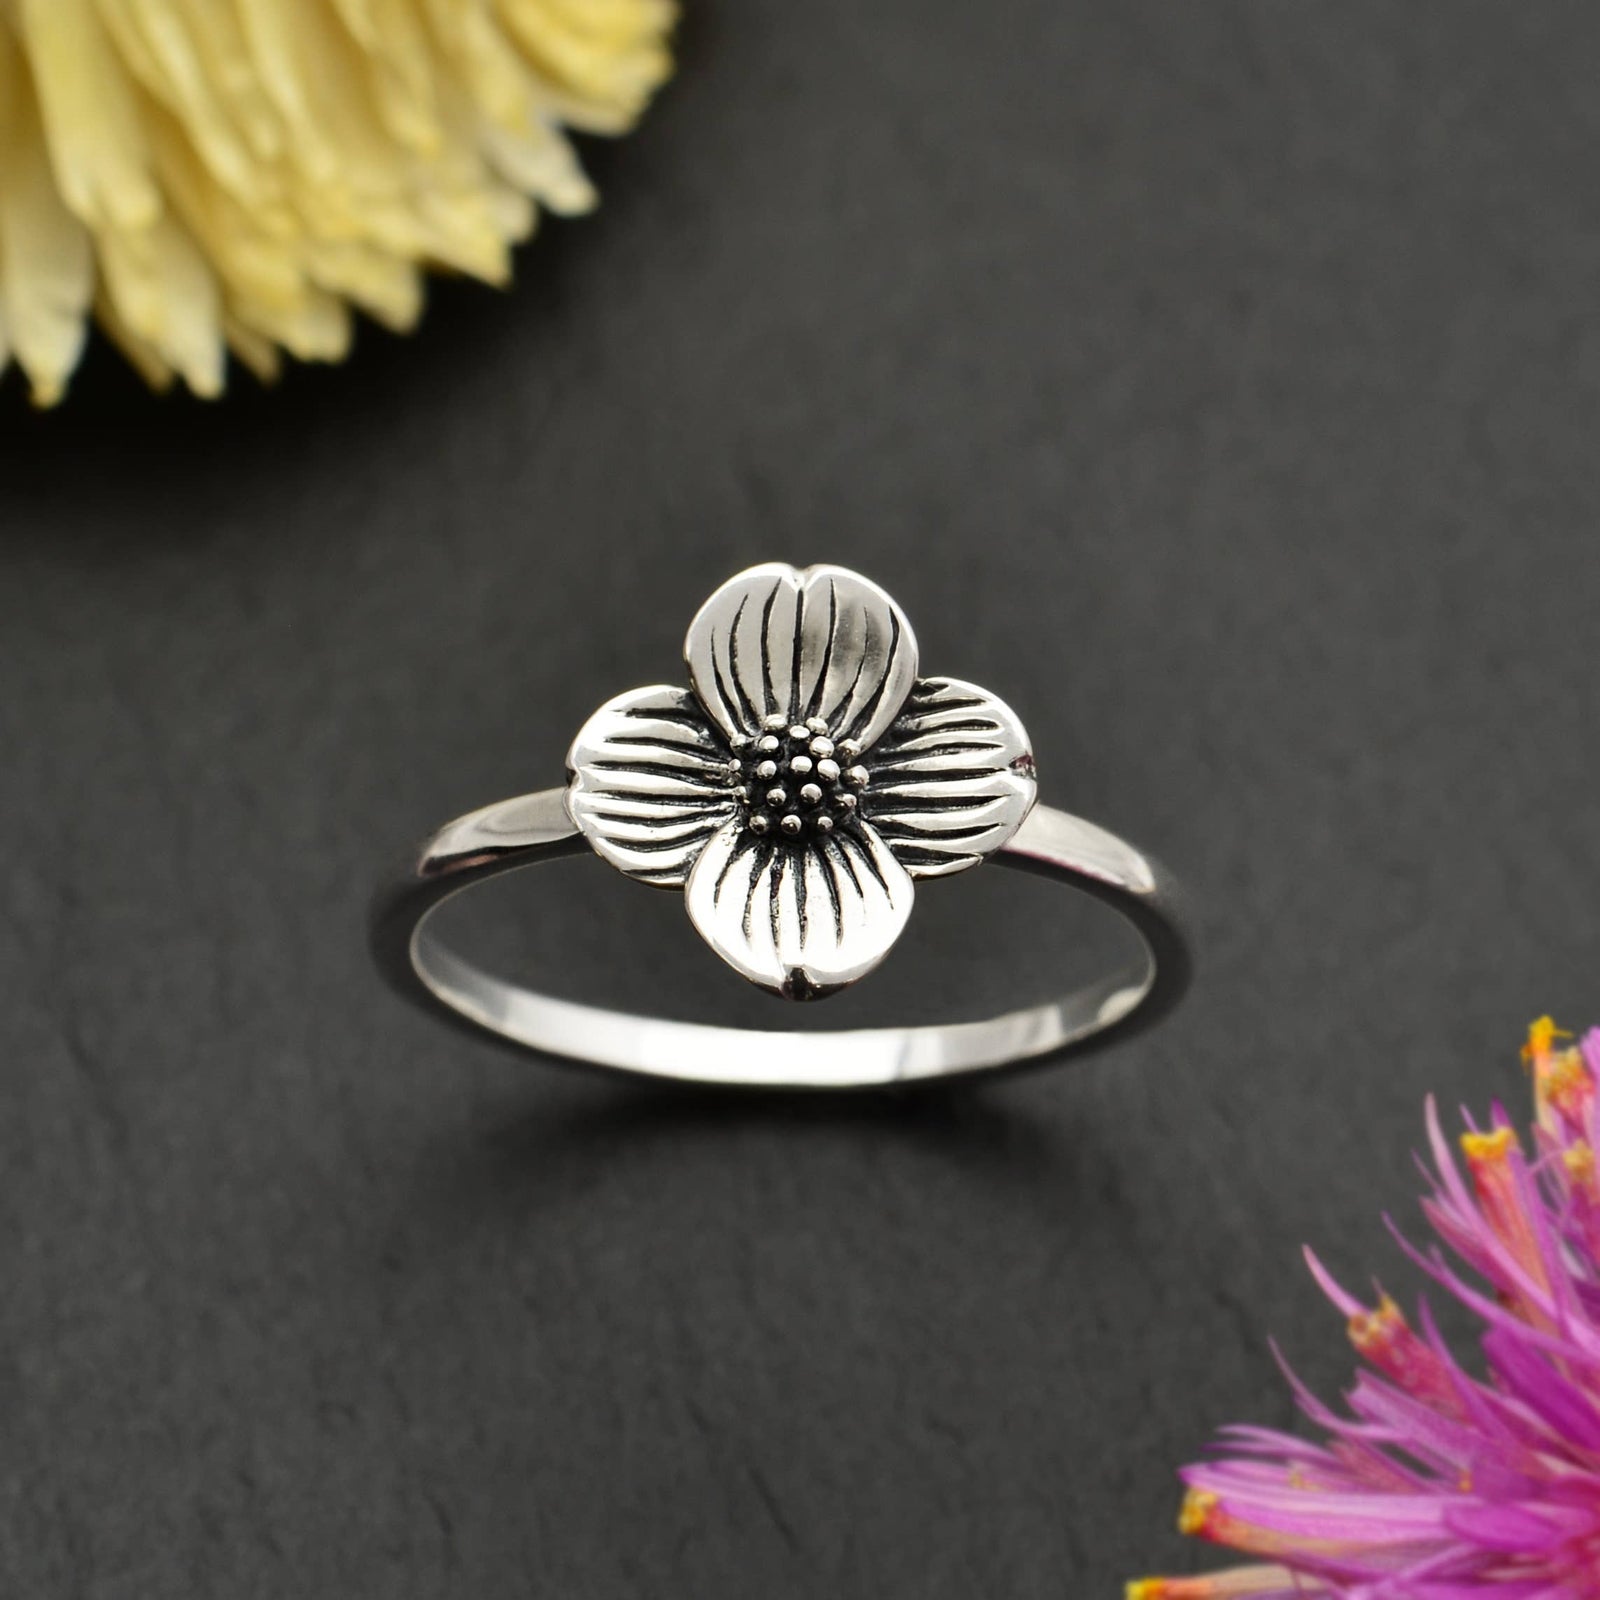 This sterling silver dogwood flower ring features delicately detailed, layered petals and a clustered center, deeply oxidized to add depth and contrast. In flower symbolism, dogwoods are thought of as sacrifice, strength, rebirth, and purity. 